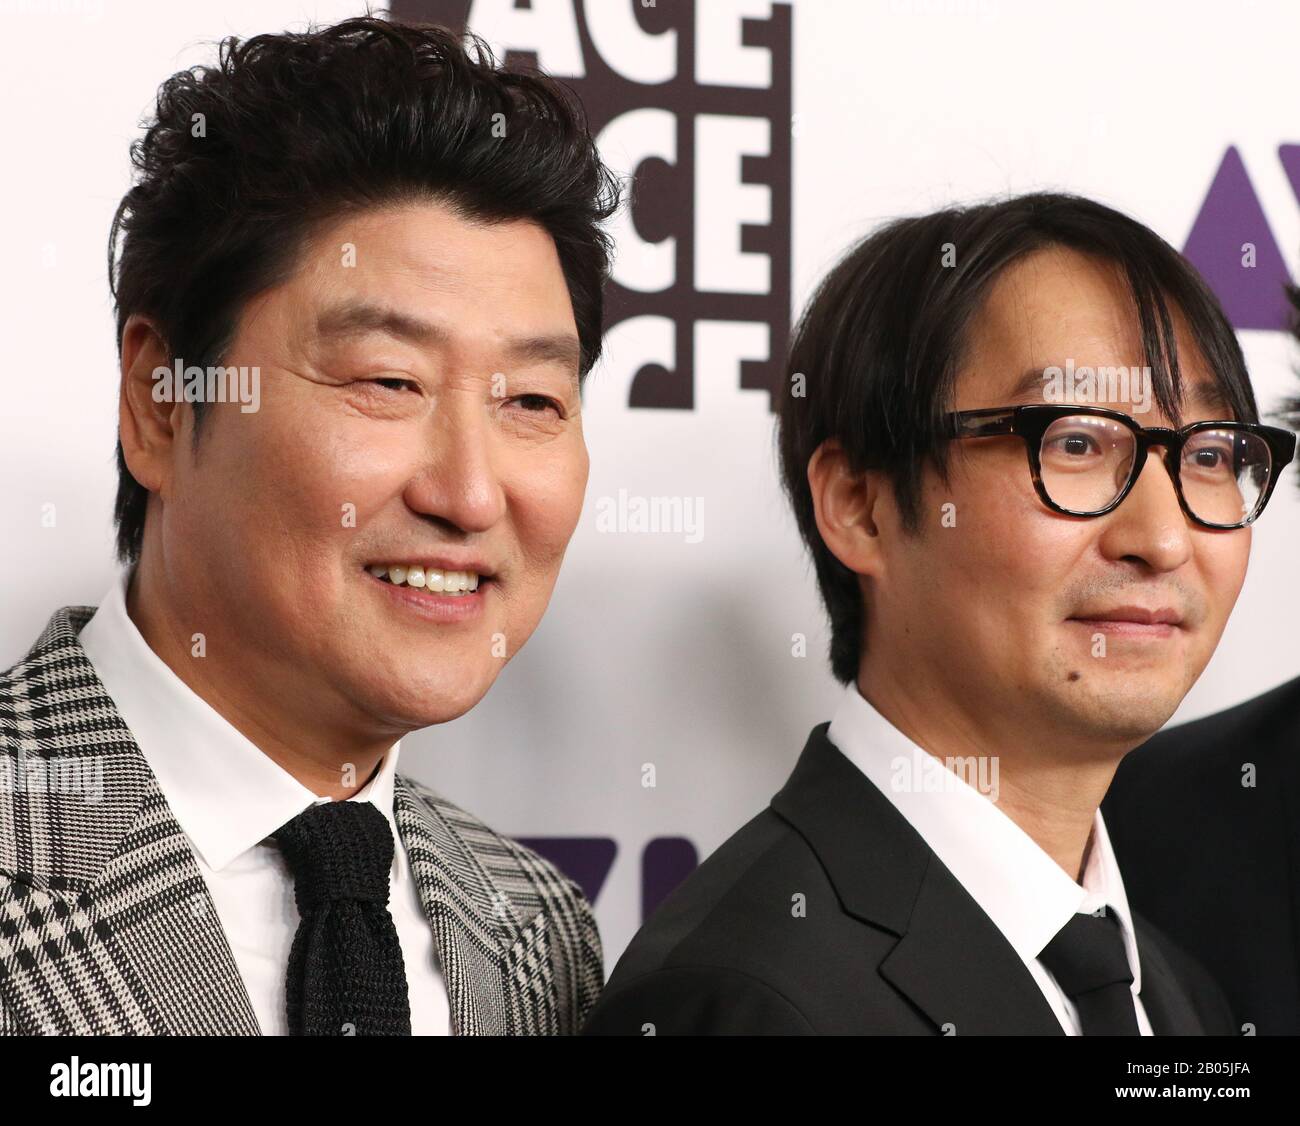 70th Annual ACE Eddie Awards at the Beverly Hilton Hotel in Beverly Hills, California on January 17, 2020 Featuring: Song Kang-ho, Jinmo Yang Where: Beverly Hills, California, United States When: 18 Jan 2020 Credit: Sheri Determan/WENN.com Stock Photo